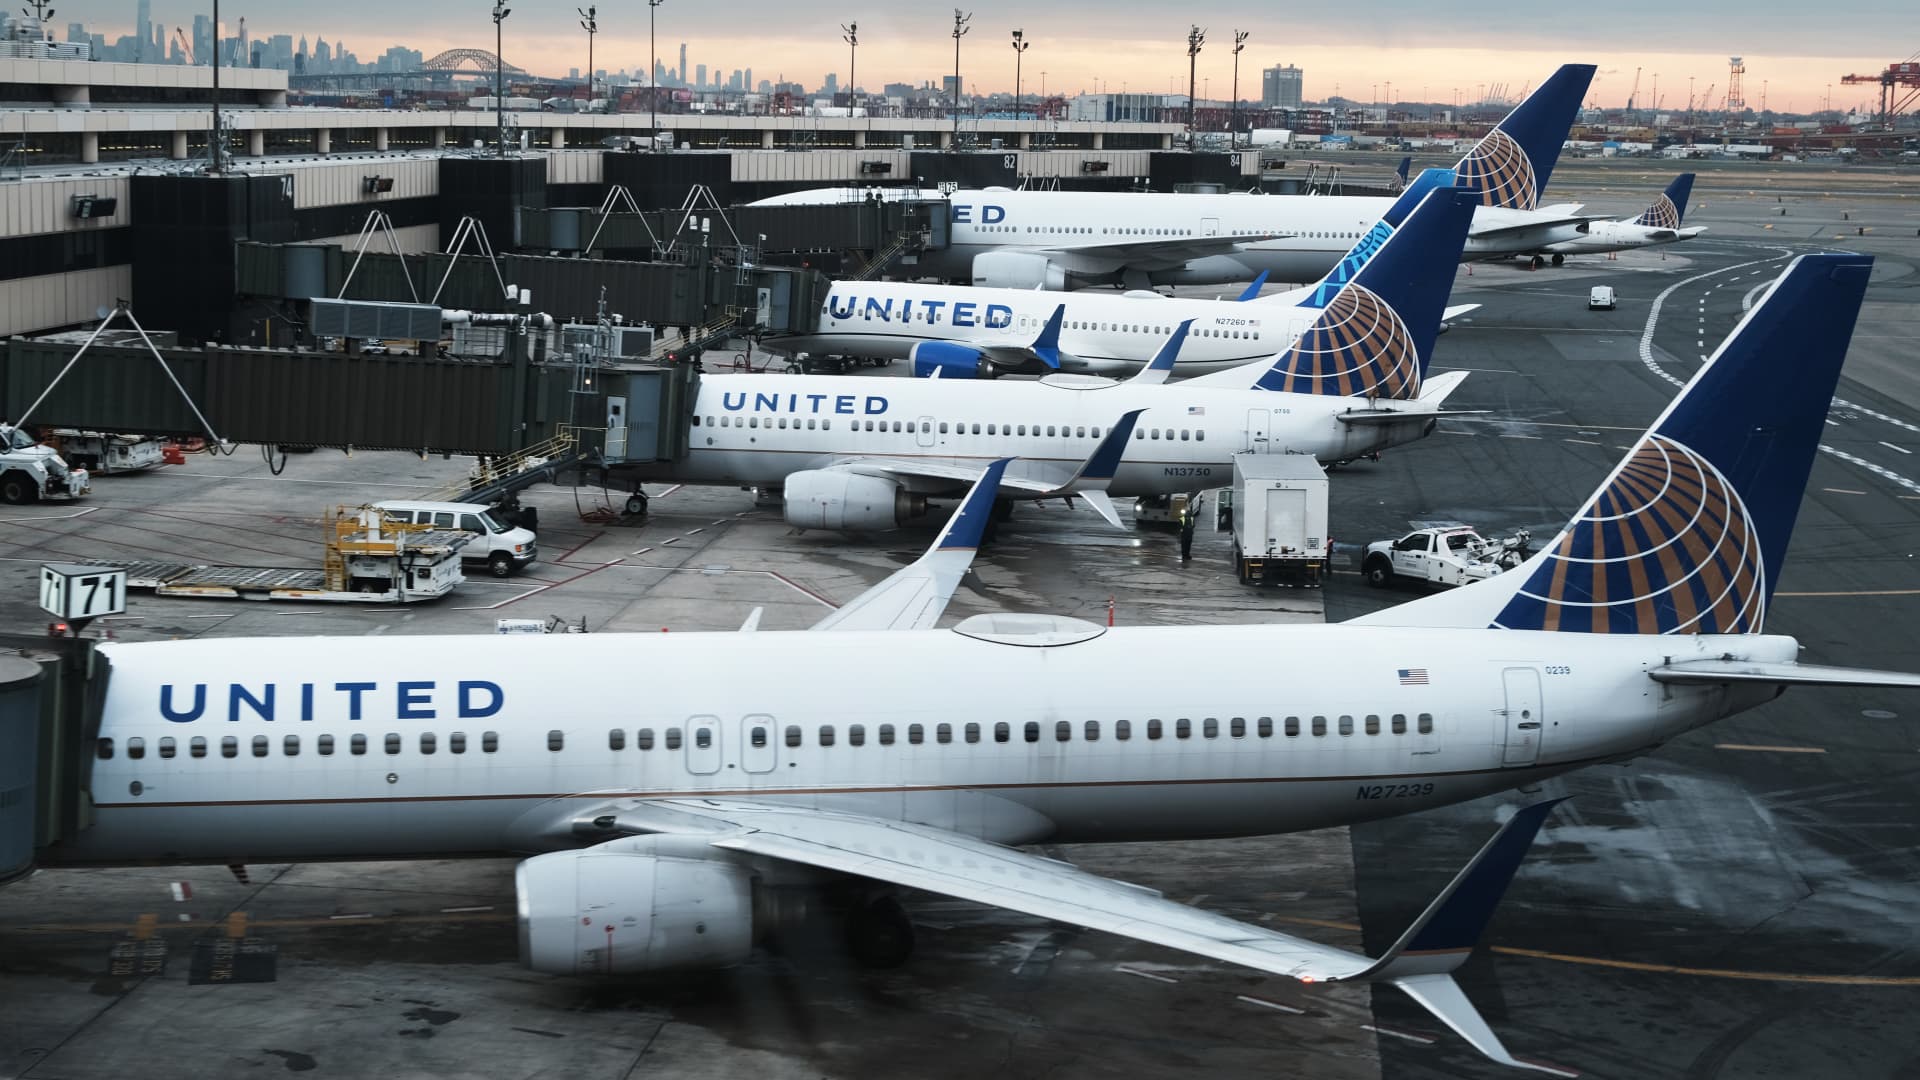 United Airlines planes sit on the runway at Newark Liberty International Airport on November 30, 2021 in Newark, New Jersey.